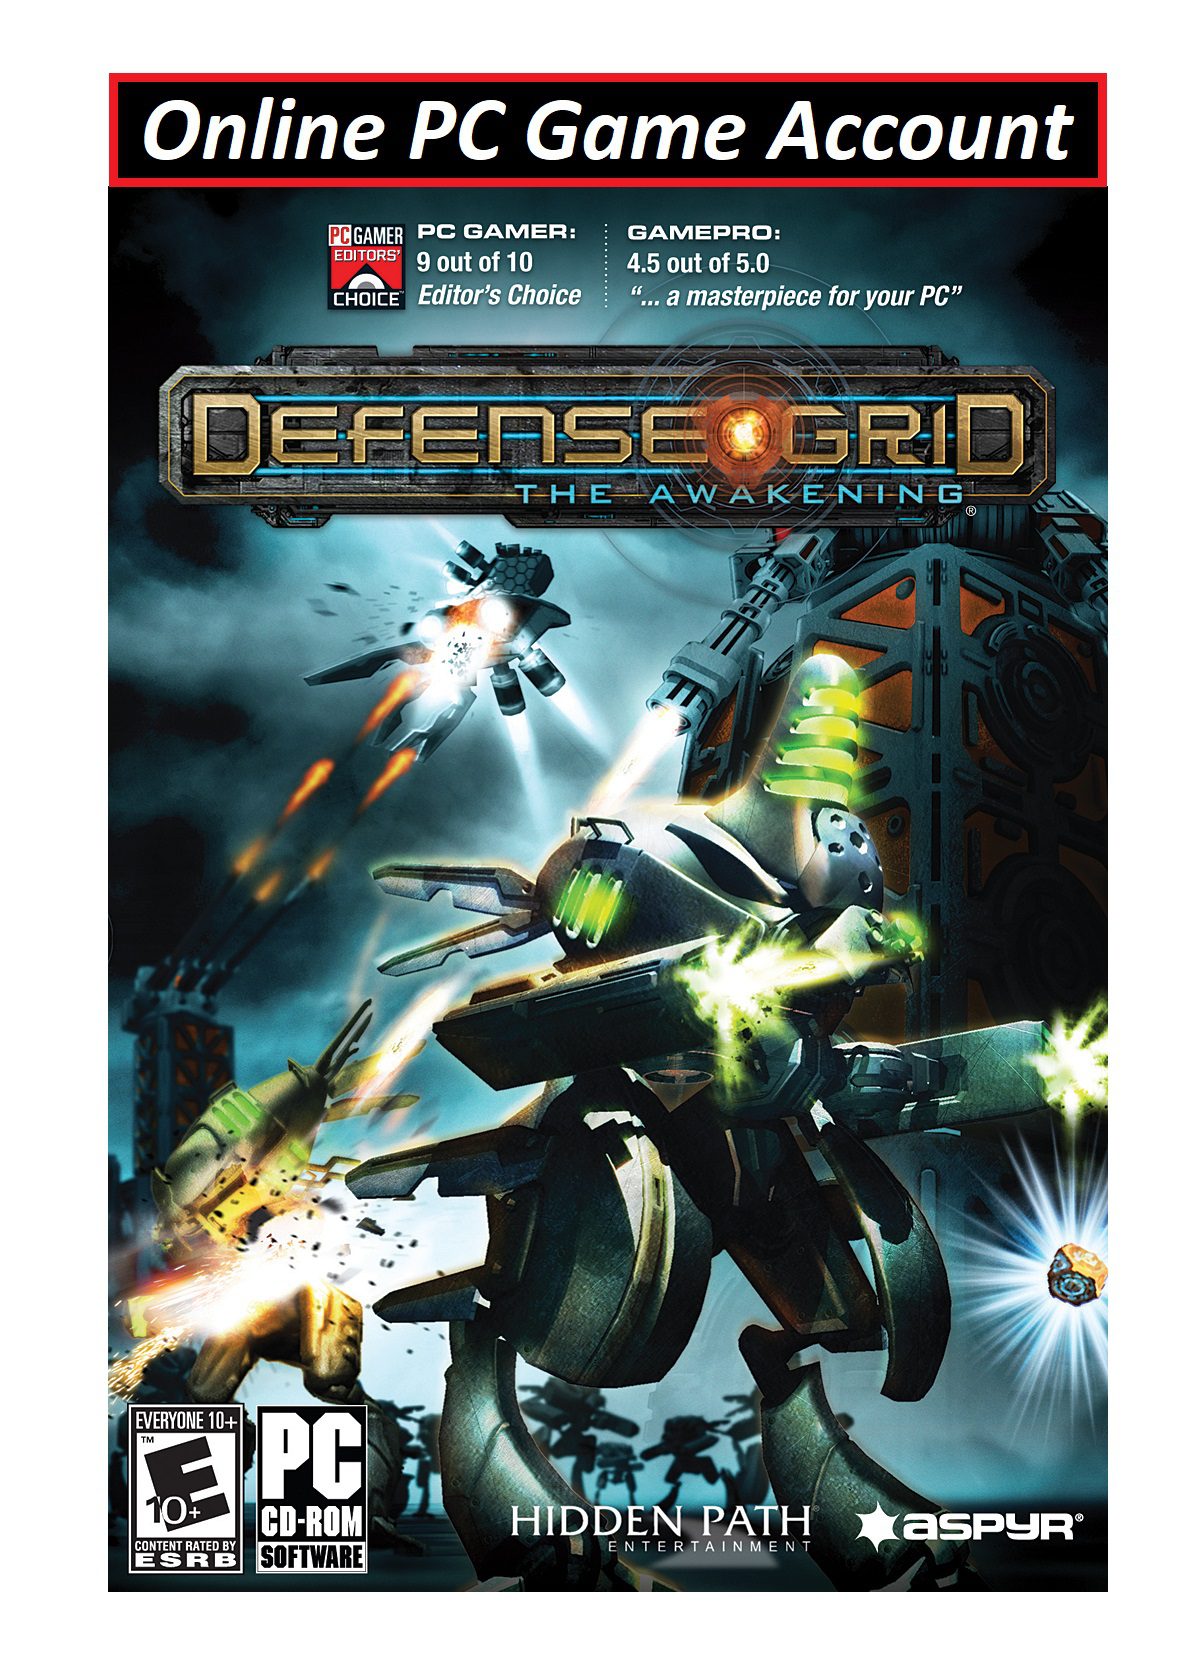 Defense grid the awakening online PC Game Account - Lifetime Game access